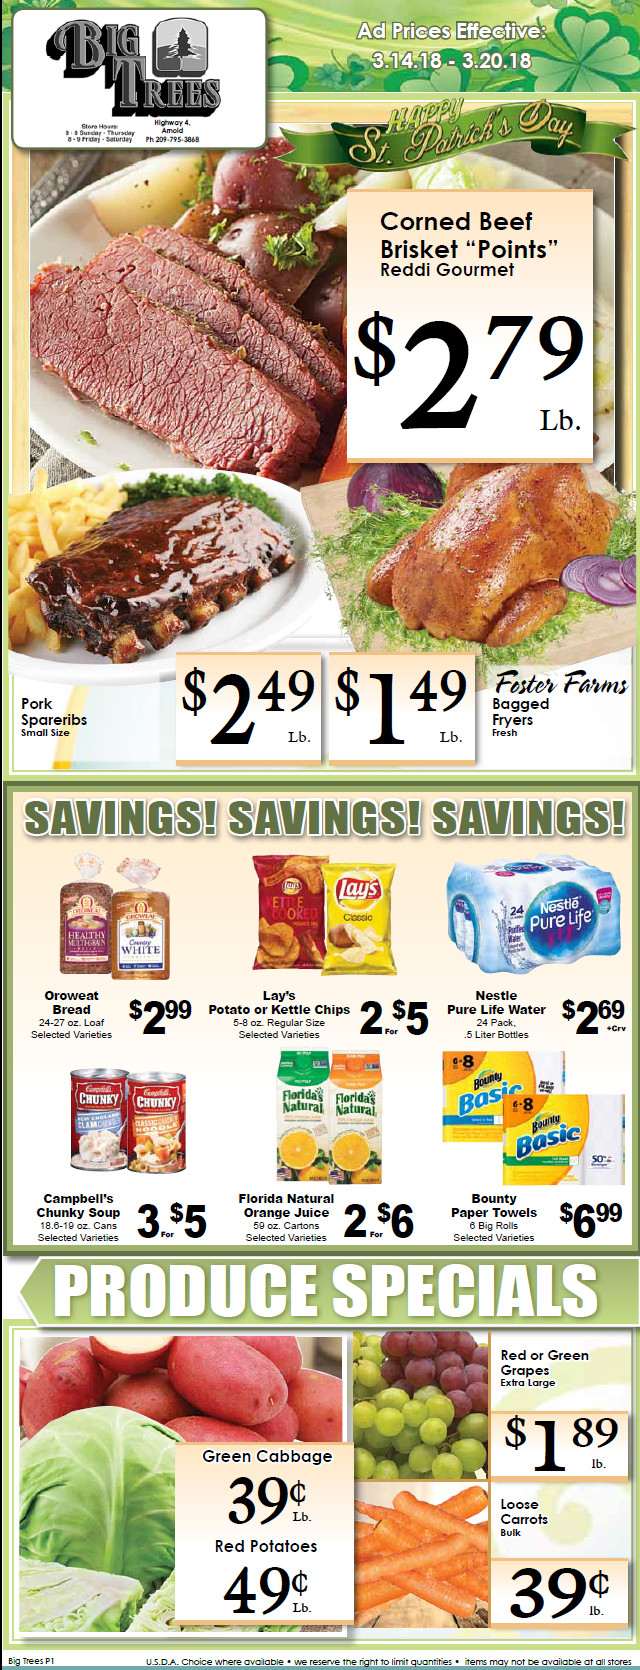 Big Trees Market Weekly Ad & Specials Through March 20th